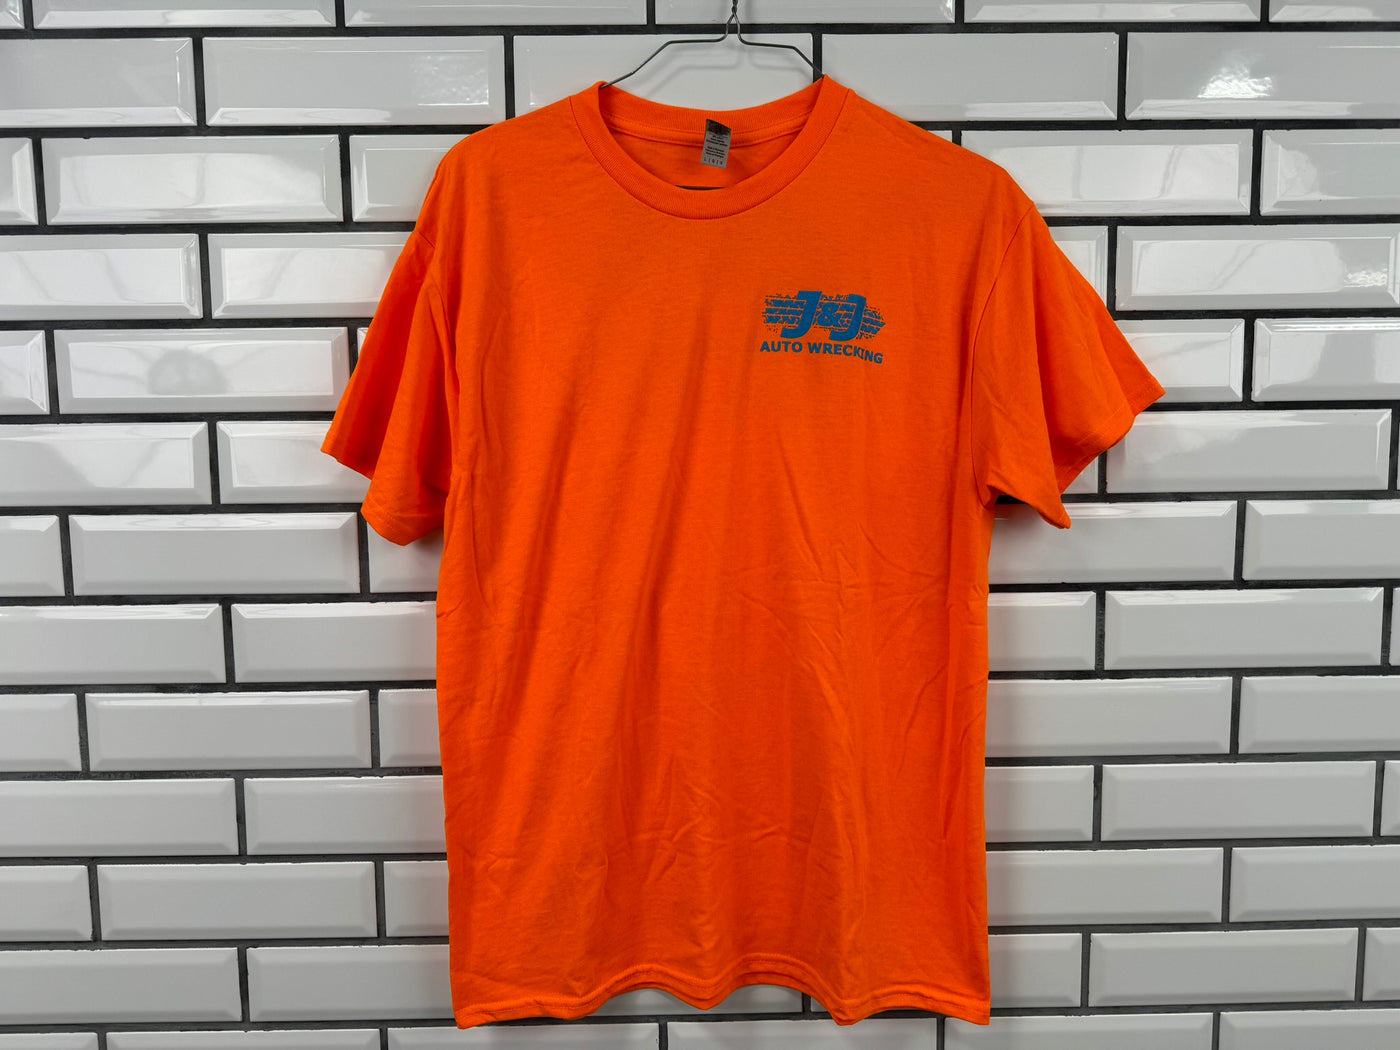 J&J Safety Orange and Bright Blue Heavy Cotton Short Sleeved Shirt with Free Shipping